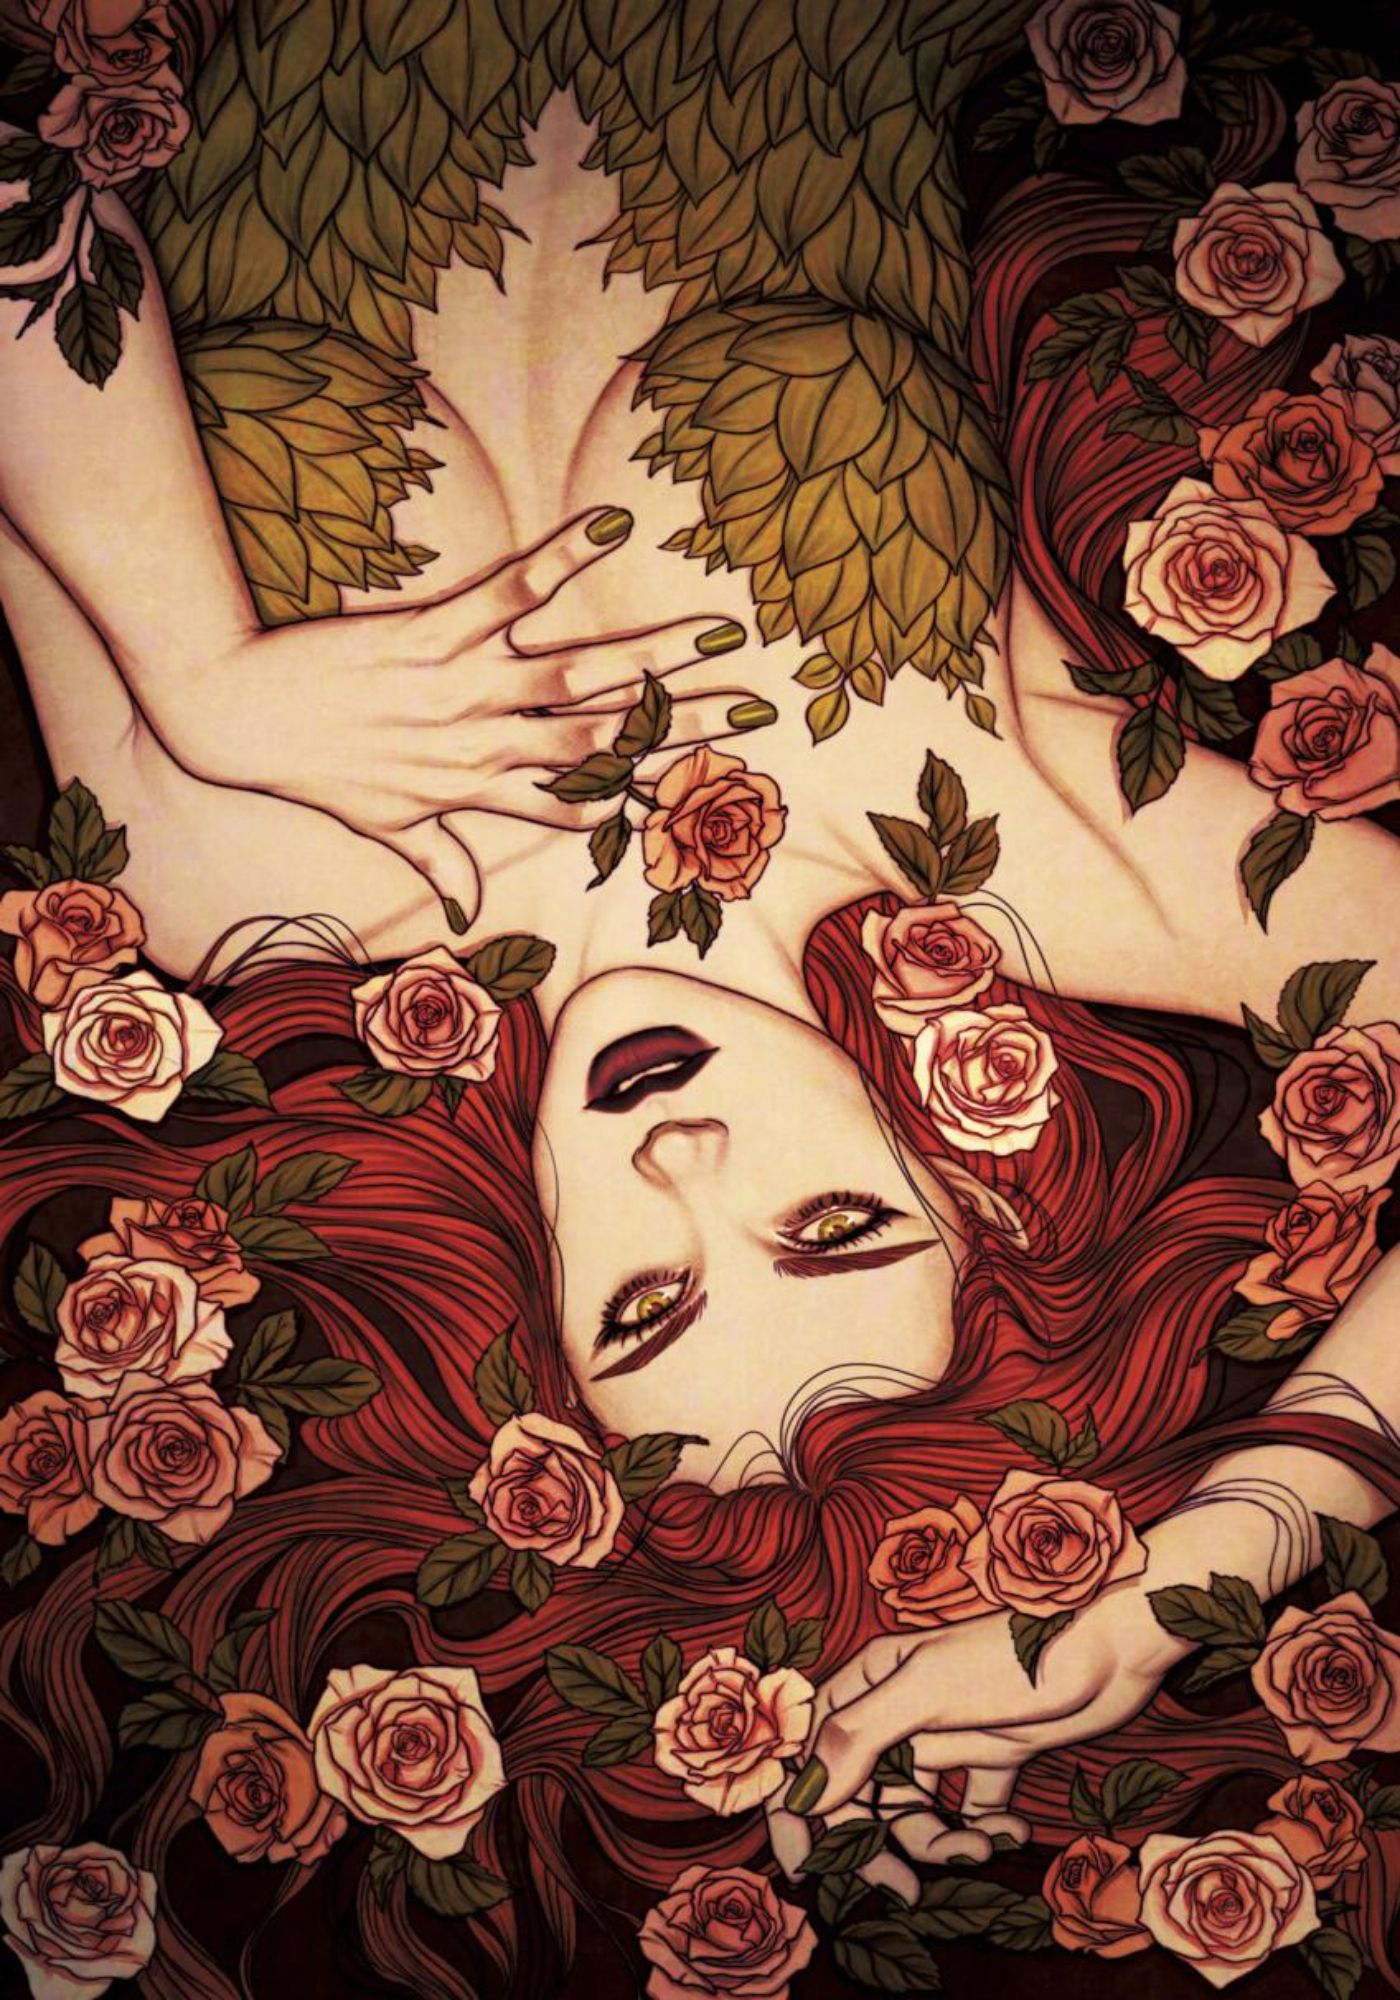 Poison Ivy Will Make You Fall in Love With Her In Stunning New DC Art